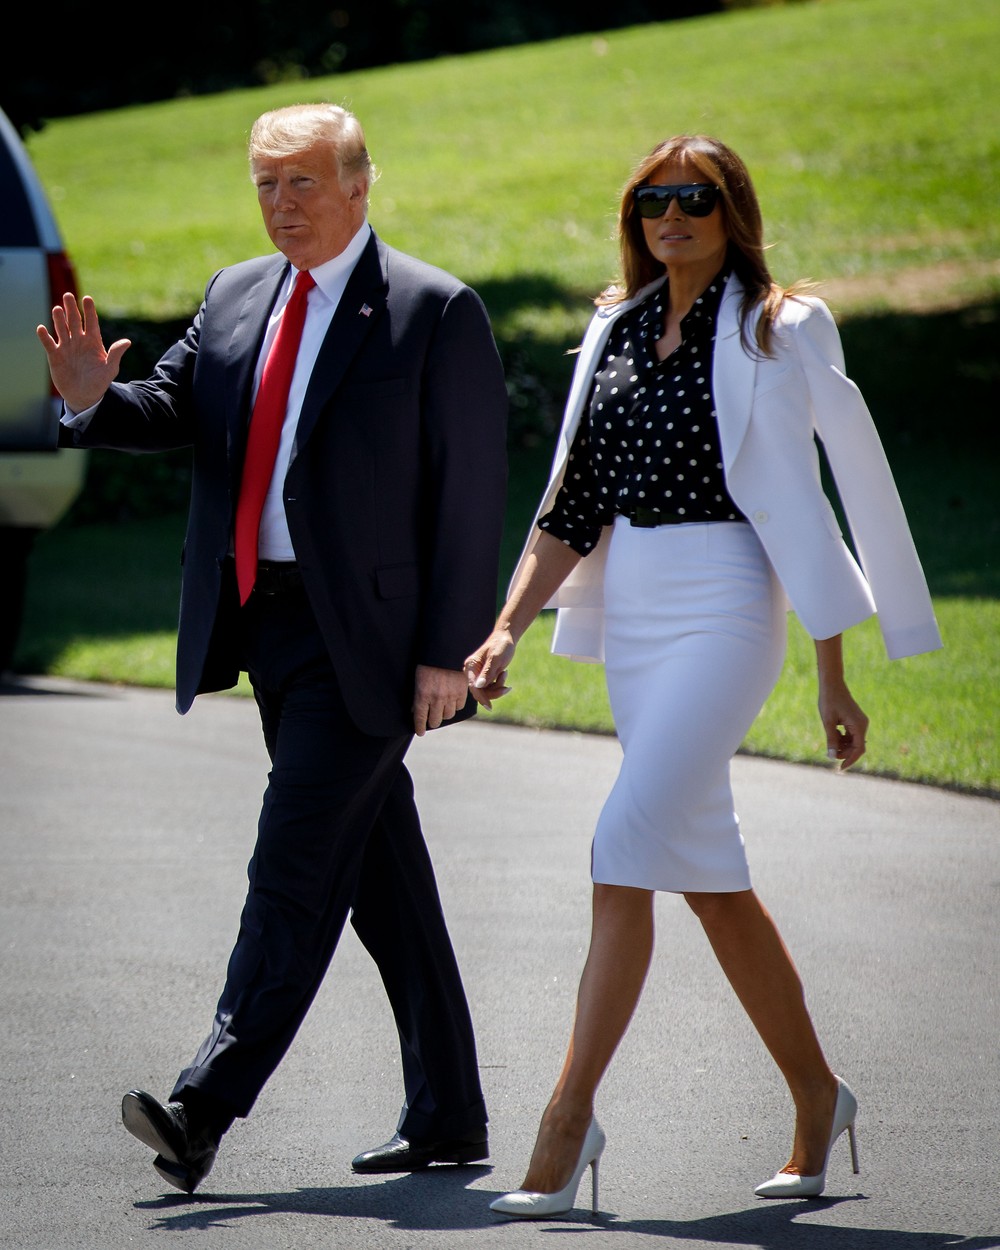 (180824) -- WASHINGTON, Aug. 24, 2018 () -- U.S. President Donald Trump and First Lady Melania Trump depart from the White House in Washington D.C., the United States, on Aug. 24, 2018. U.S. President Donald Trump on Friday tweeted that he has asked Secretary of State Mike Pompeo to cancel his upcoming trip to the Democratic People's Republic of Korea (DPRK), citing the lacking of progress on the Peninsula denuclearization., Image: 383933220, License: Rights-managed, Restrictions: WORLD RIGHTS excluding China - Fee Payable Upon Reproduction - For queries contact Avalon.red - sales@avalon.red London: +44 (0) 20 7421 6000 Los Angeles: +1 (310) 822 0419 Berlin: +49 (0) 30 76 212 251 Madrid: +34 91 533 4289, Model Release: no, Credit line: Ting Shen / Avalon Editorial / Profimedia